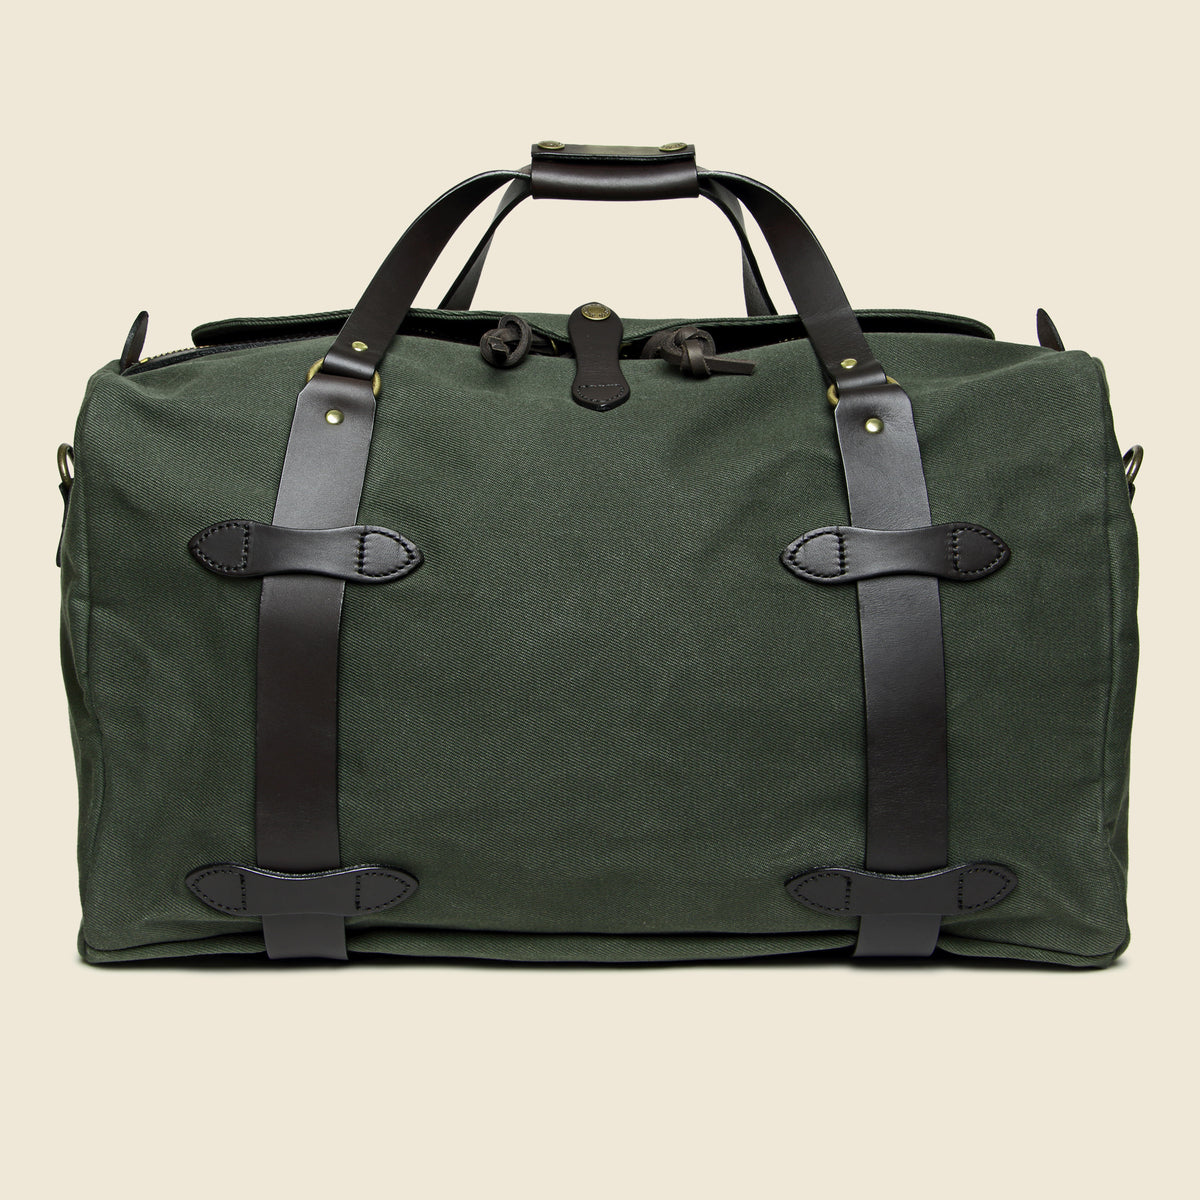 Duffel Bag Size For Carry On | IQS Executive